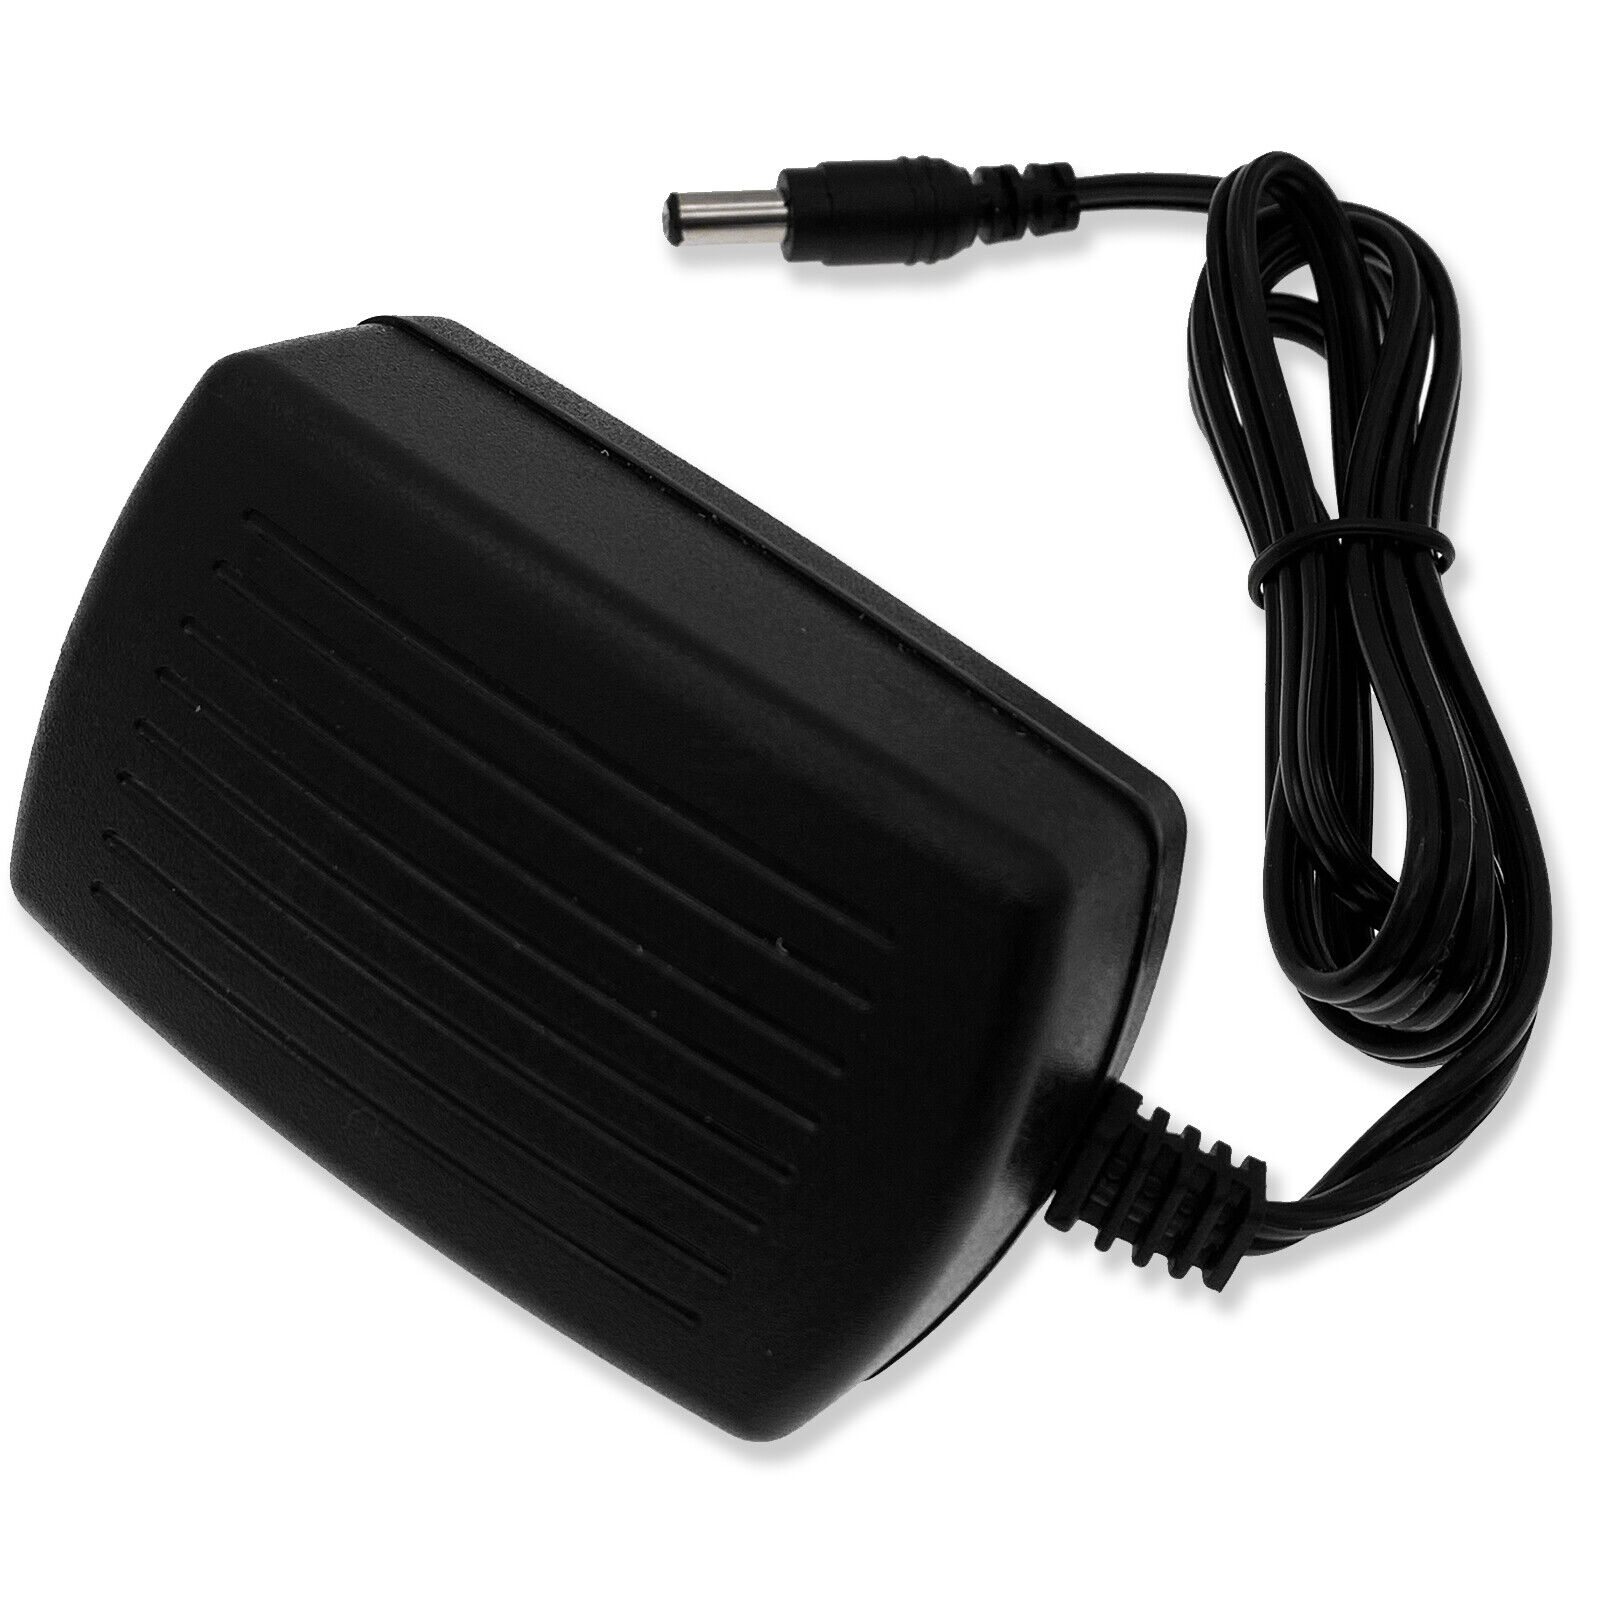 *Brand NEW* Getac S410 Semi-Rugged Laptop 65W AC Adapter Charger Power Supply Cord Cable